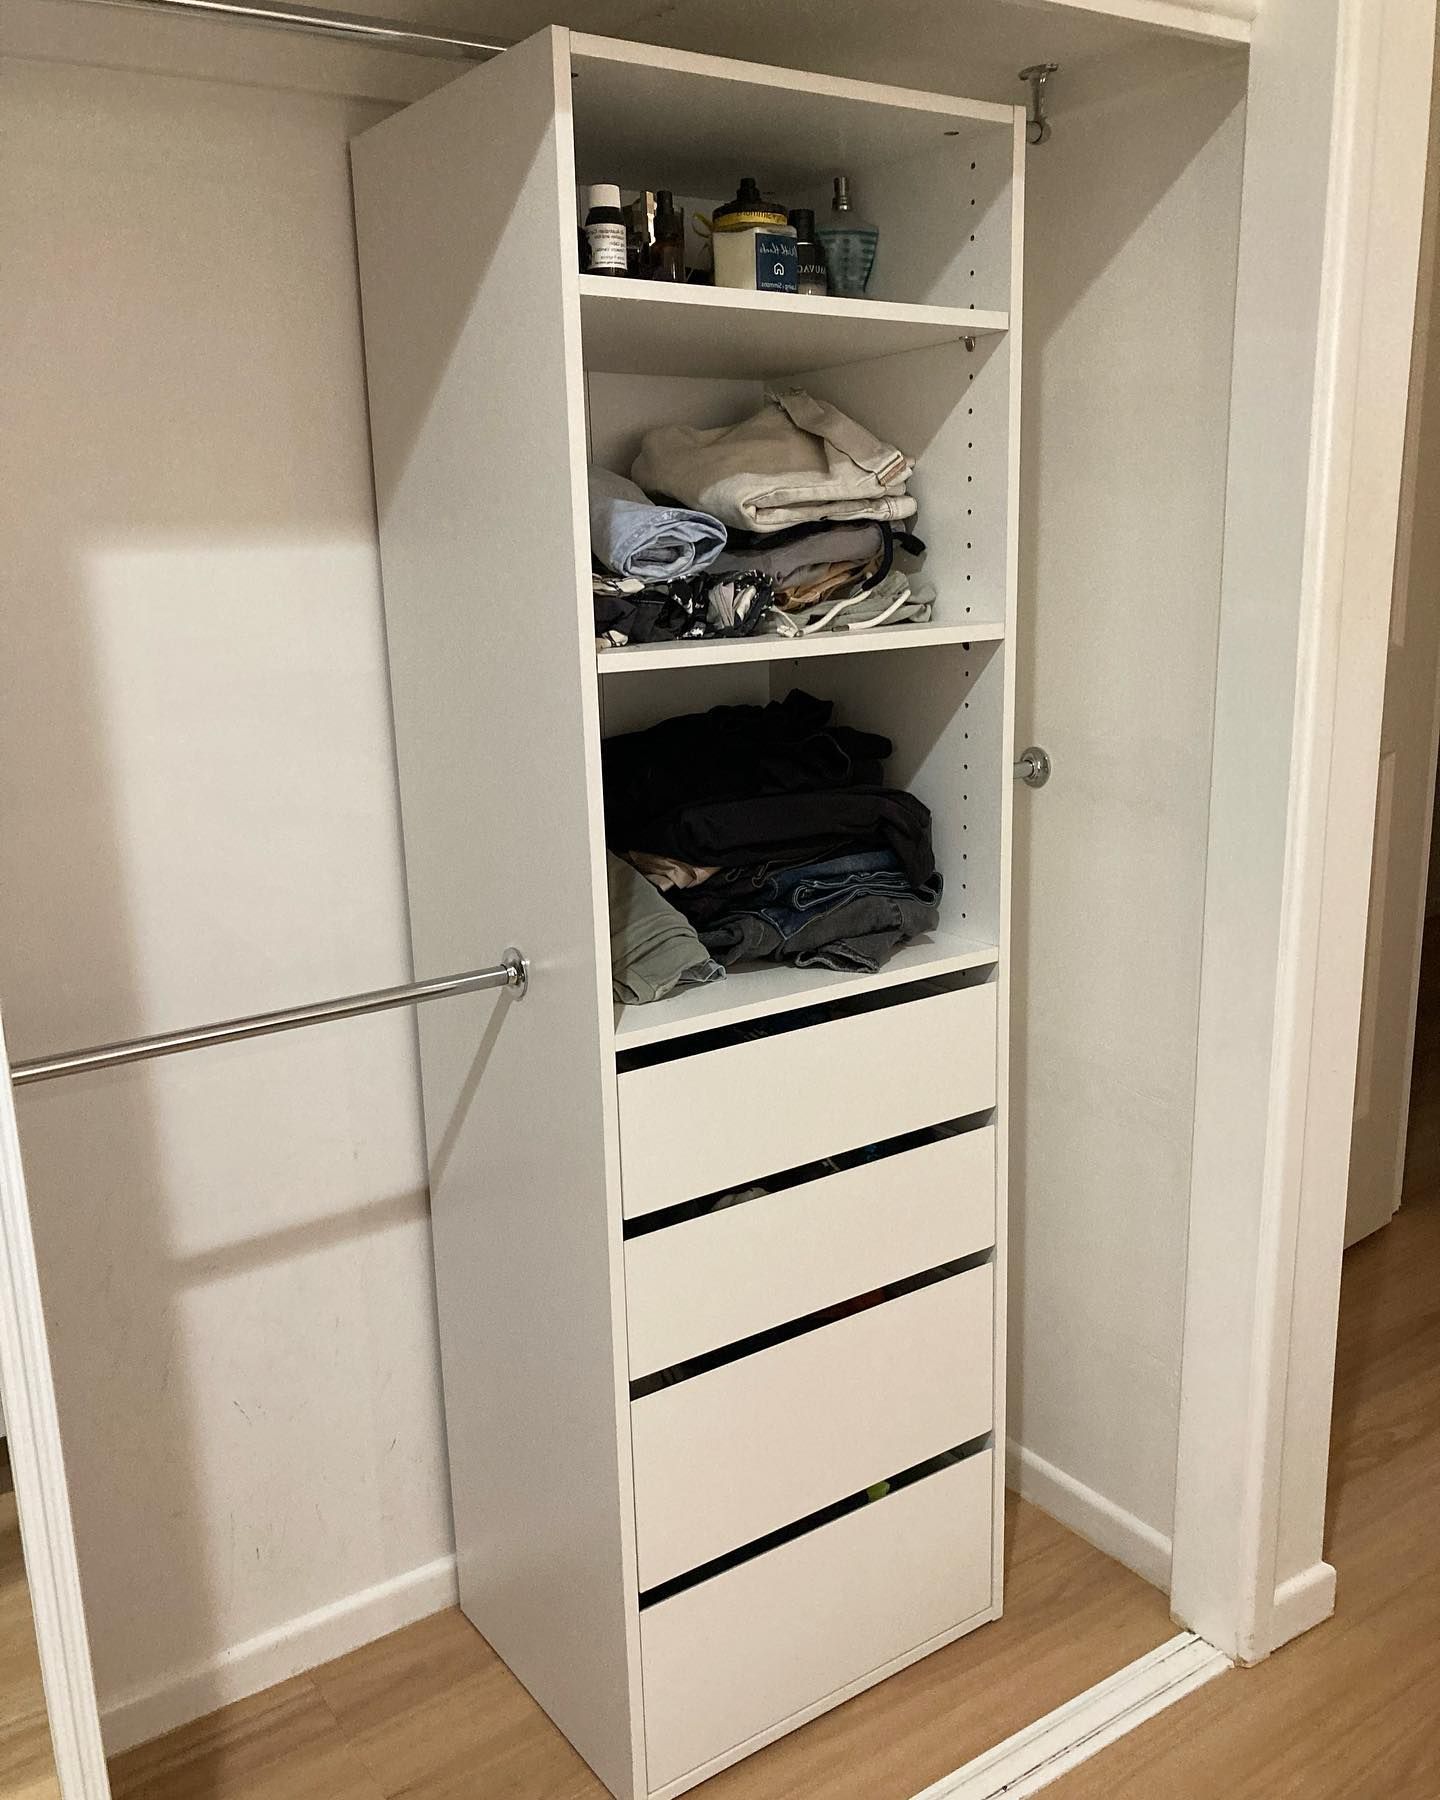 Tailor 3 Shelf 4 Drawer Wardrobe | Tailor With 3 Shelving Towers Wardrobes (View 18 of 20)